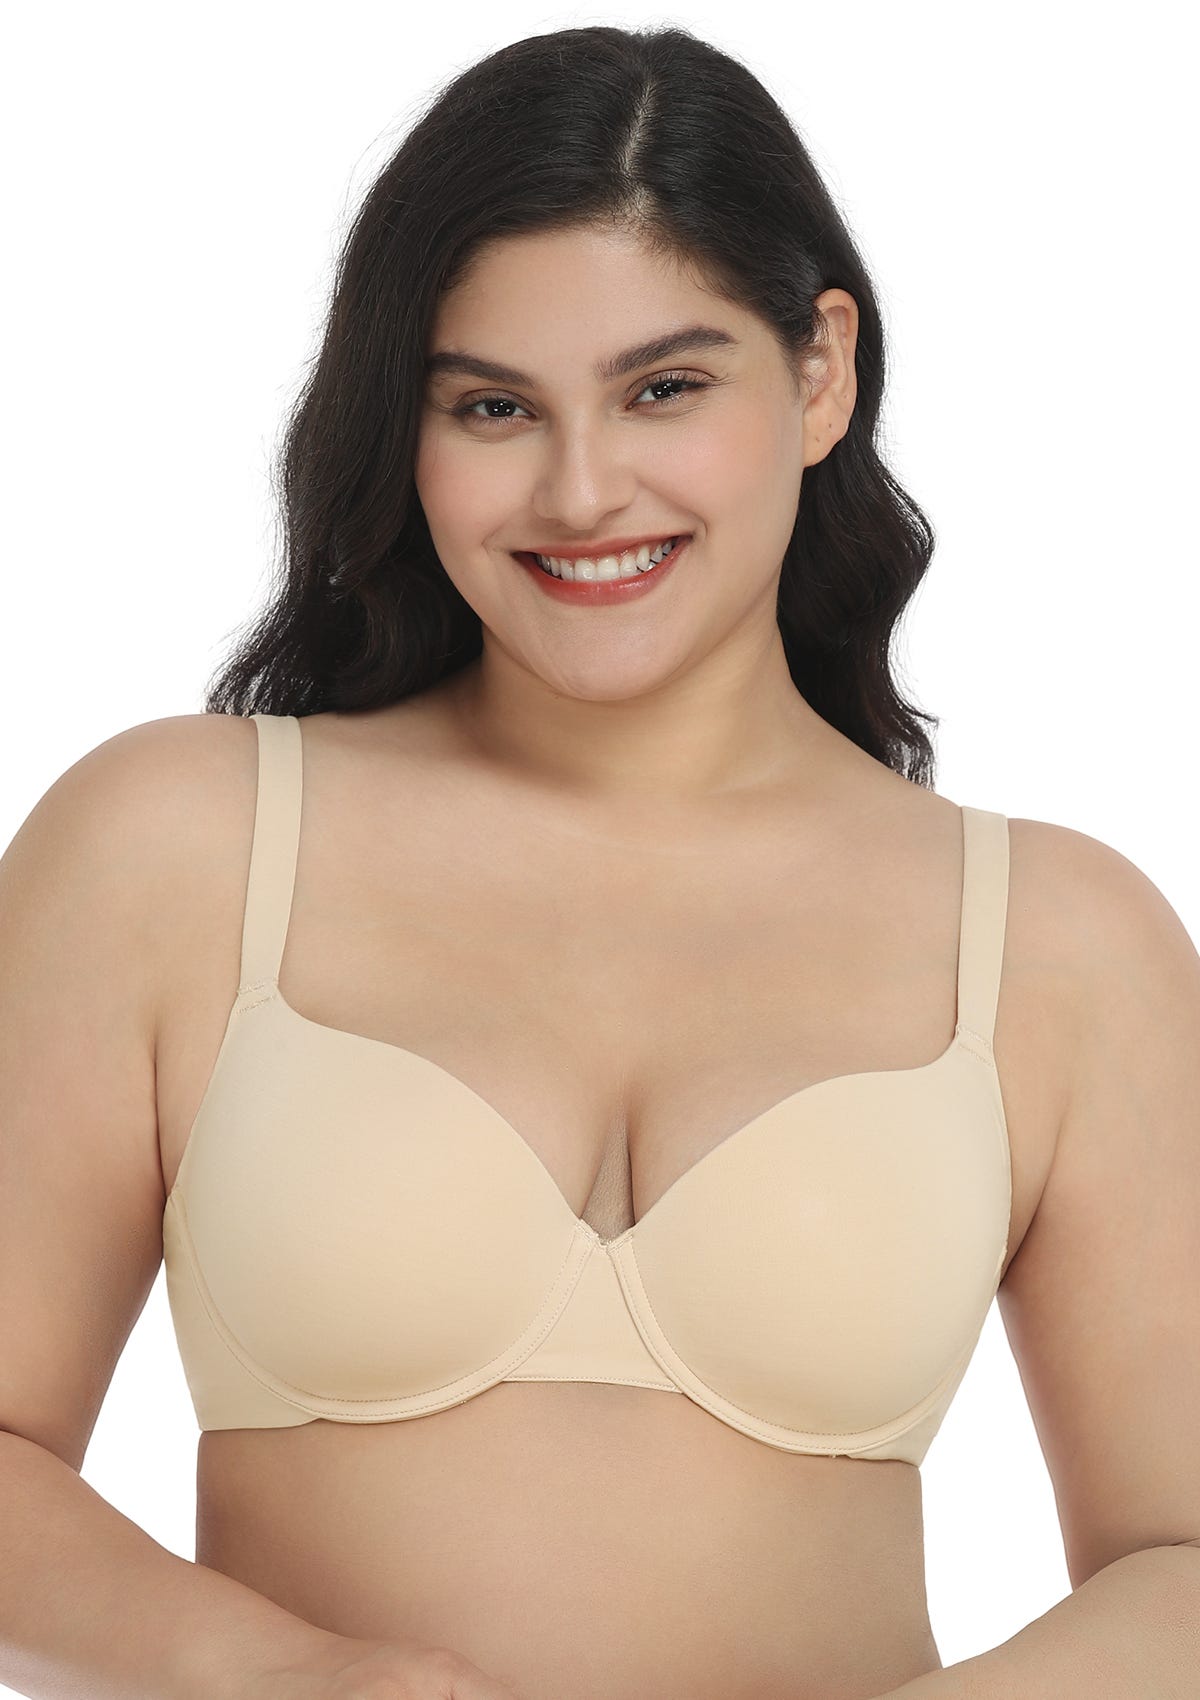 Bra Fit for Seniors: Finding Comfort and Support at Every Age